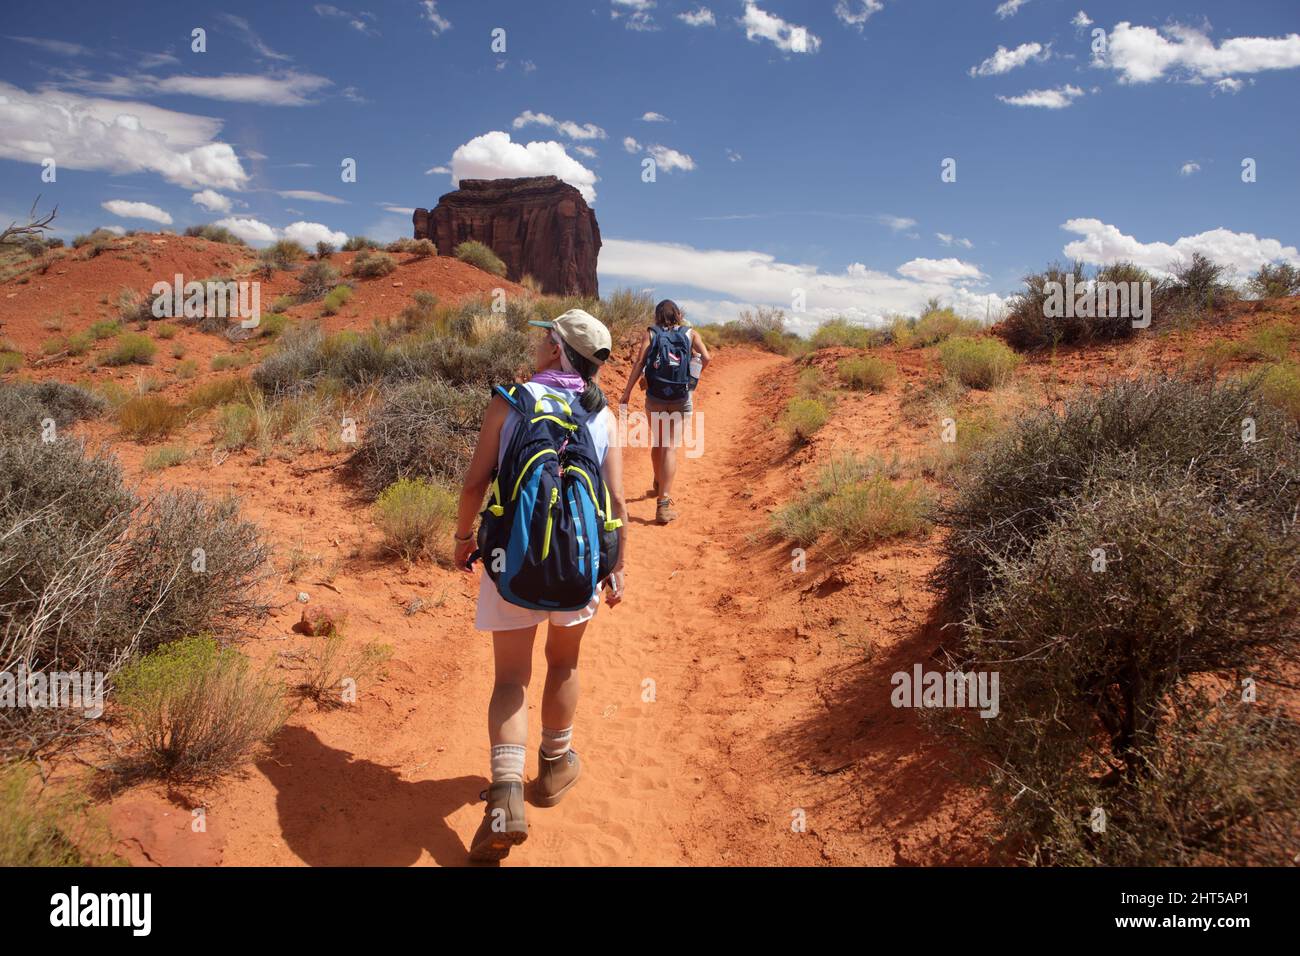 Hiking the Wildcat Trail in Monument Valley Navajo Tribal Park, USA. A hot august day with blue sky and sandstone cliffs, buttes, and pinnacles. West Stock Photo